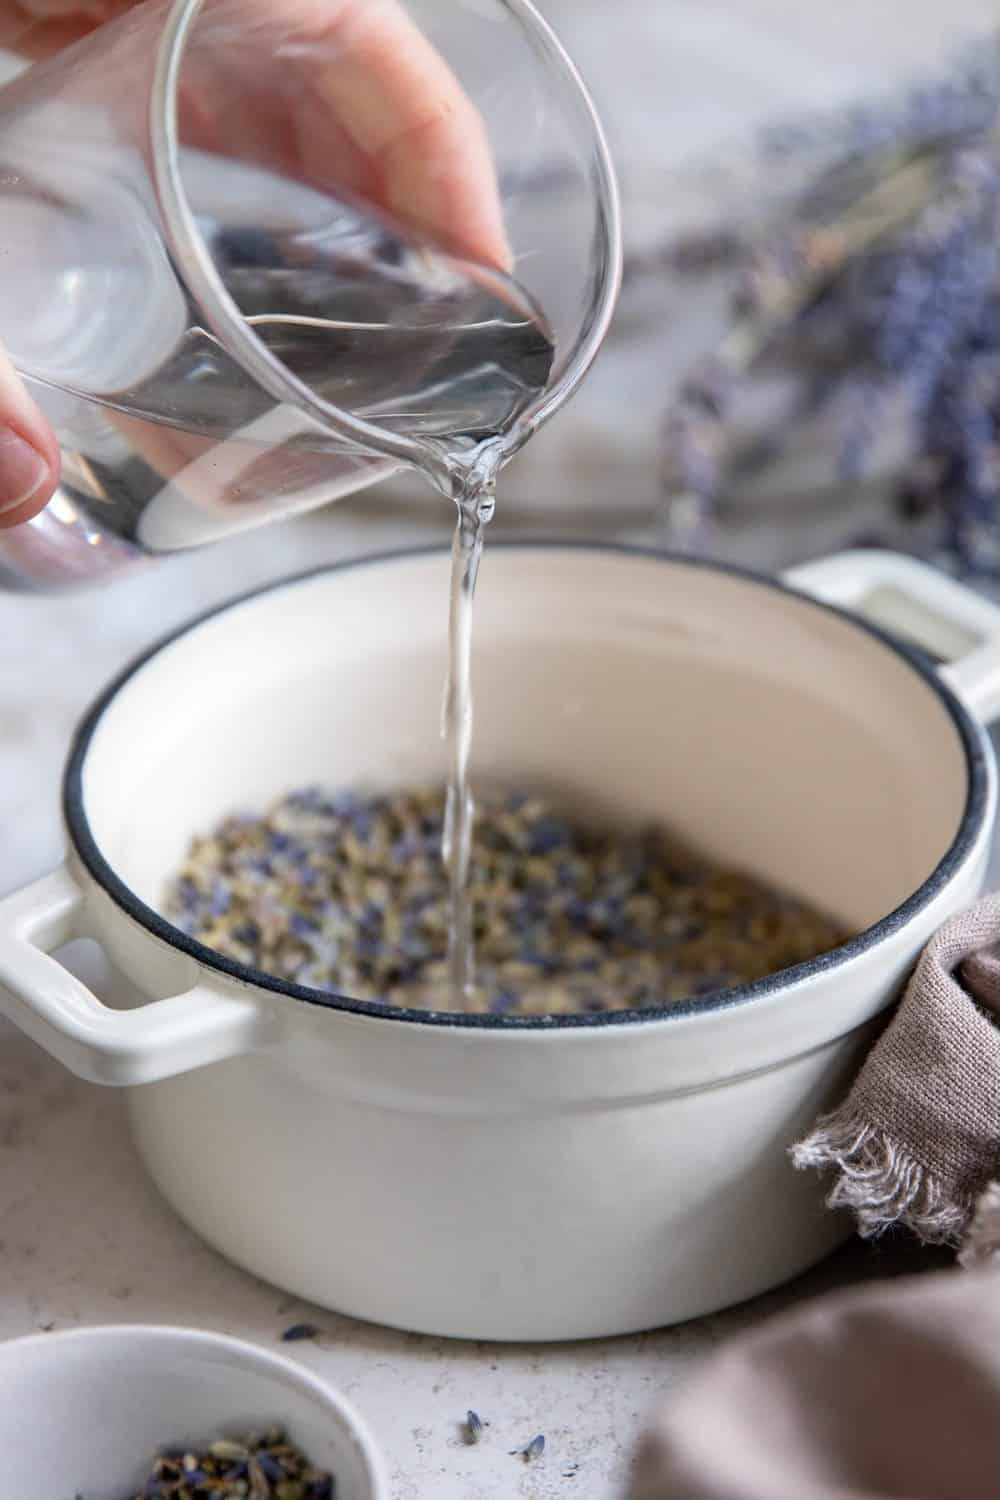 Combine the flowers and water in a pot to make your own lavender water hydrosol